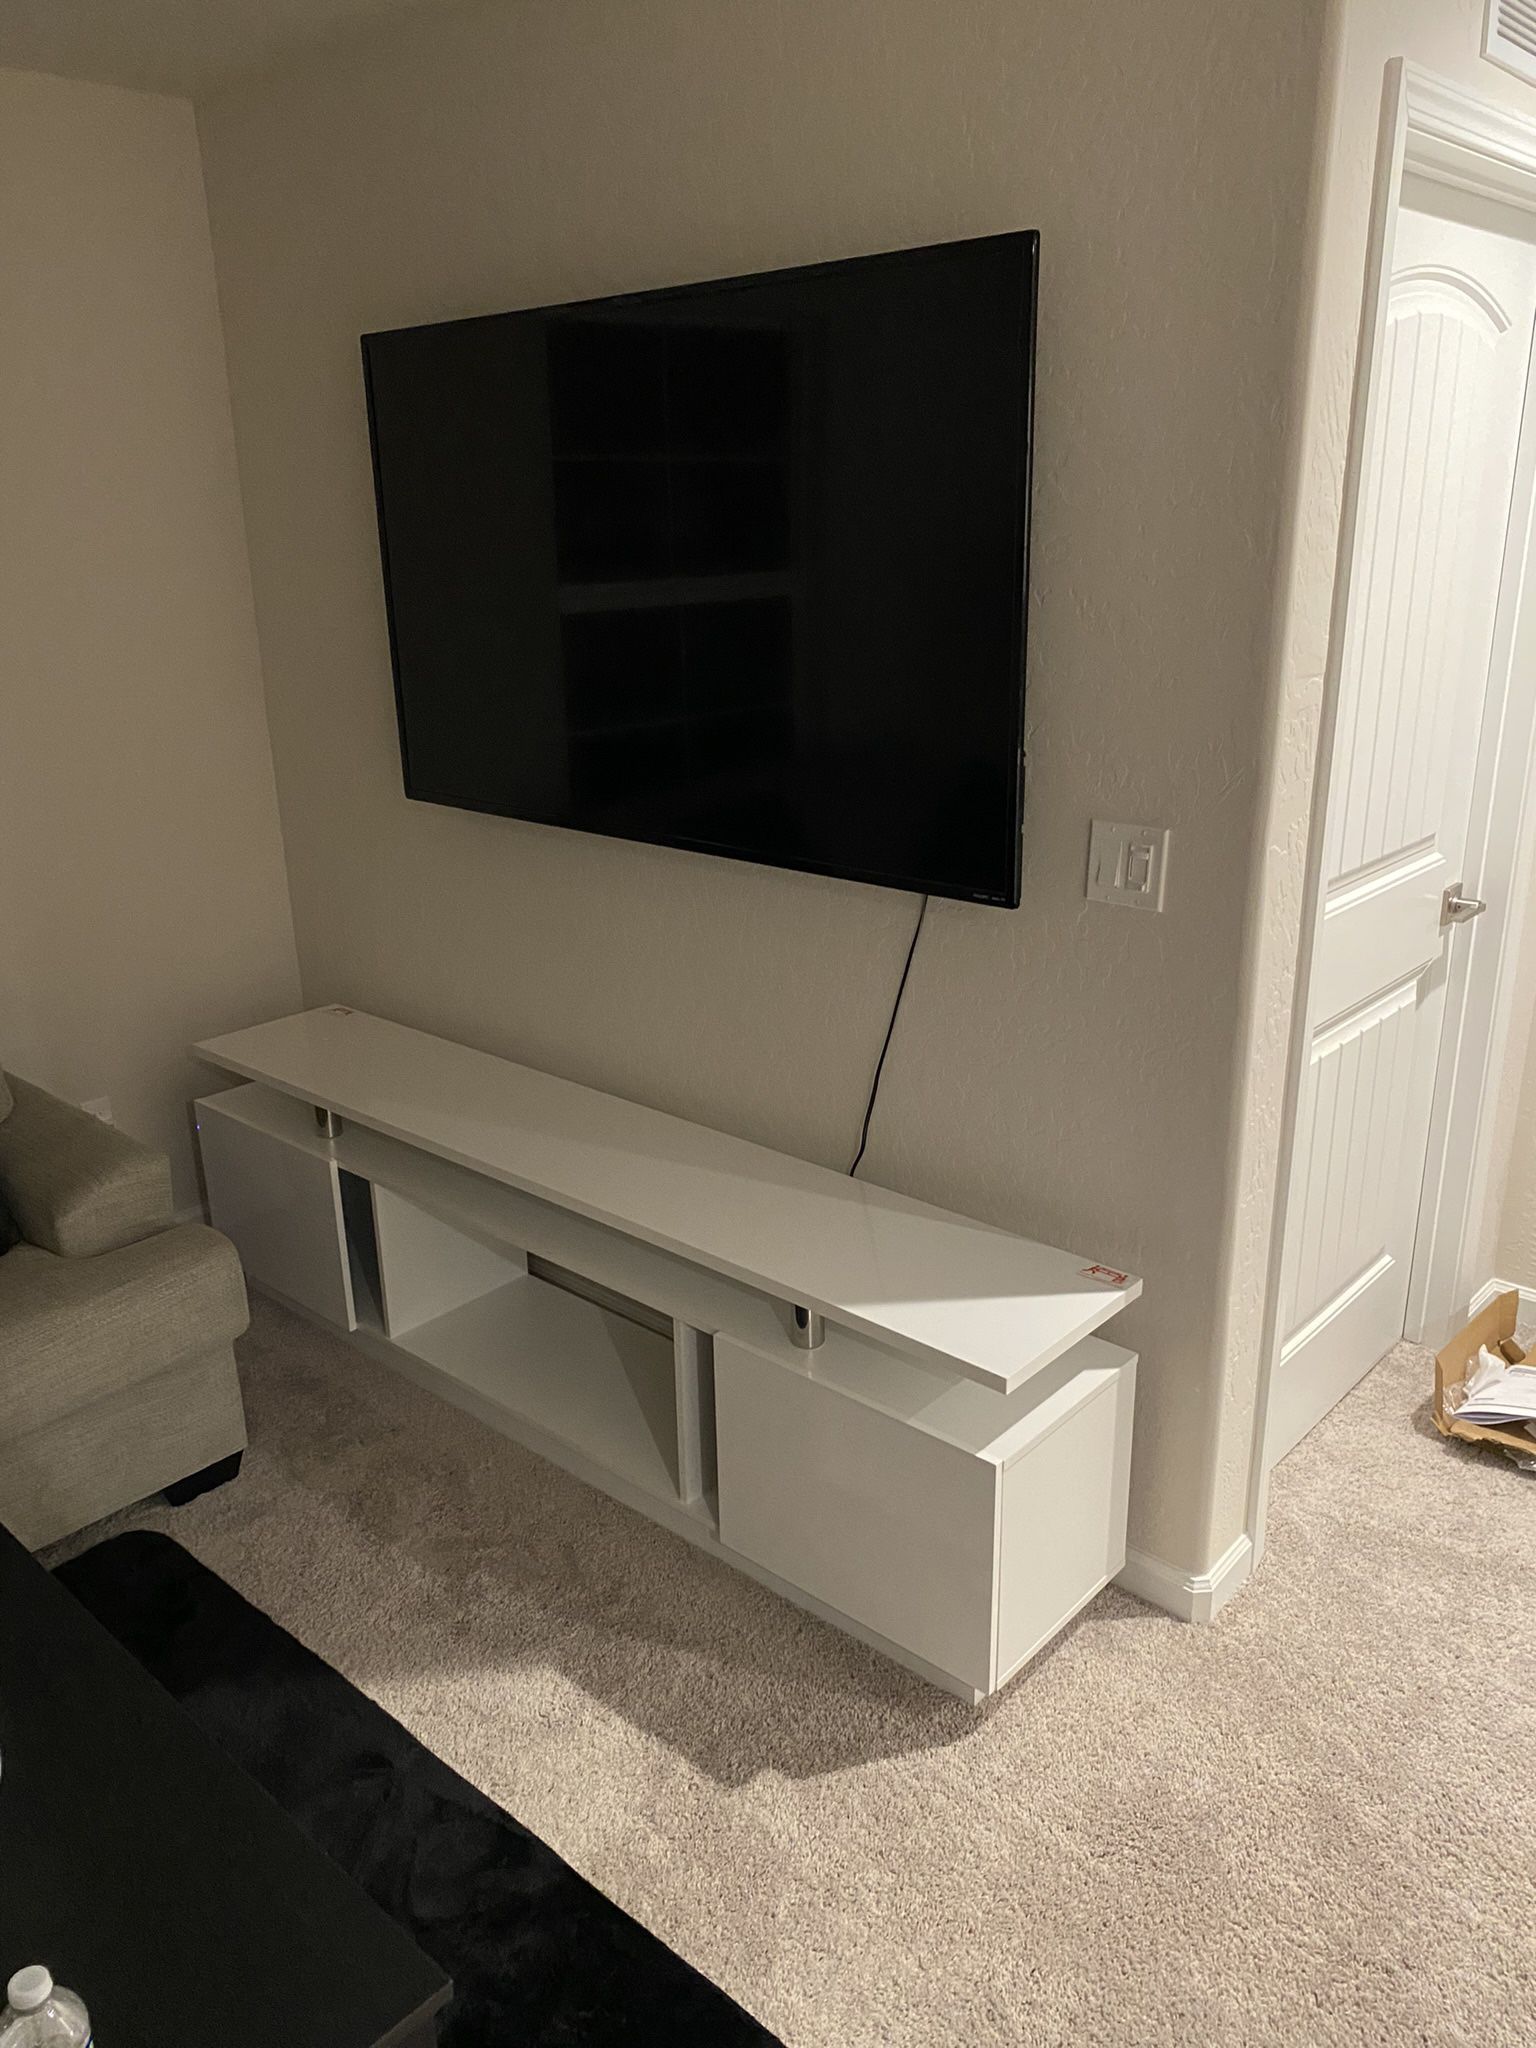 Tv Mount And Other Items 